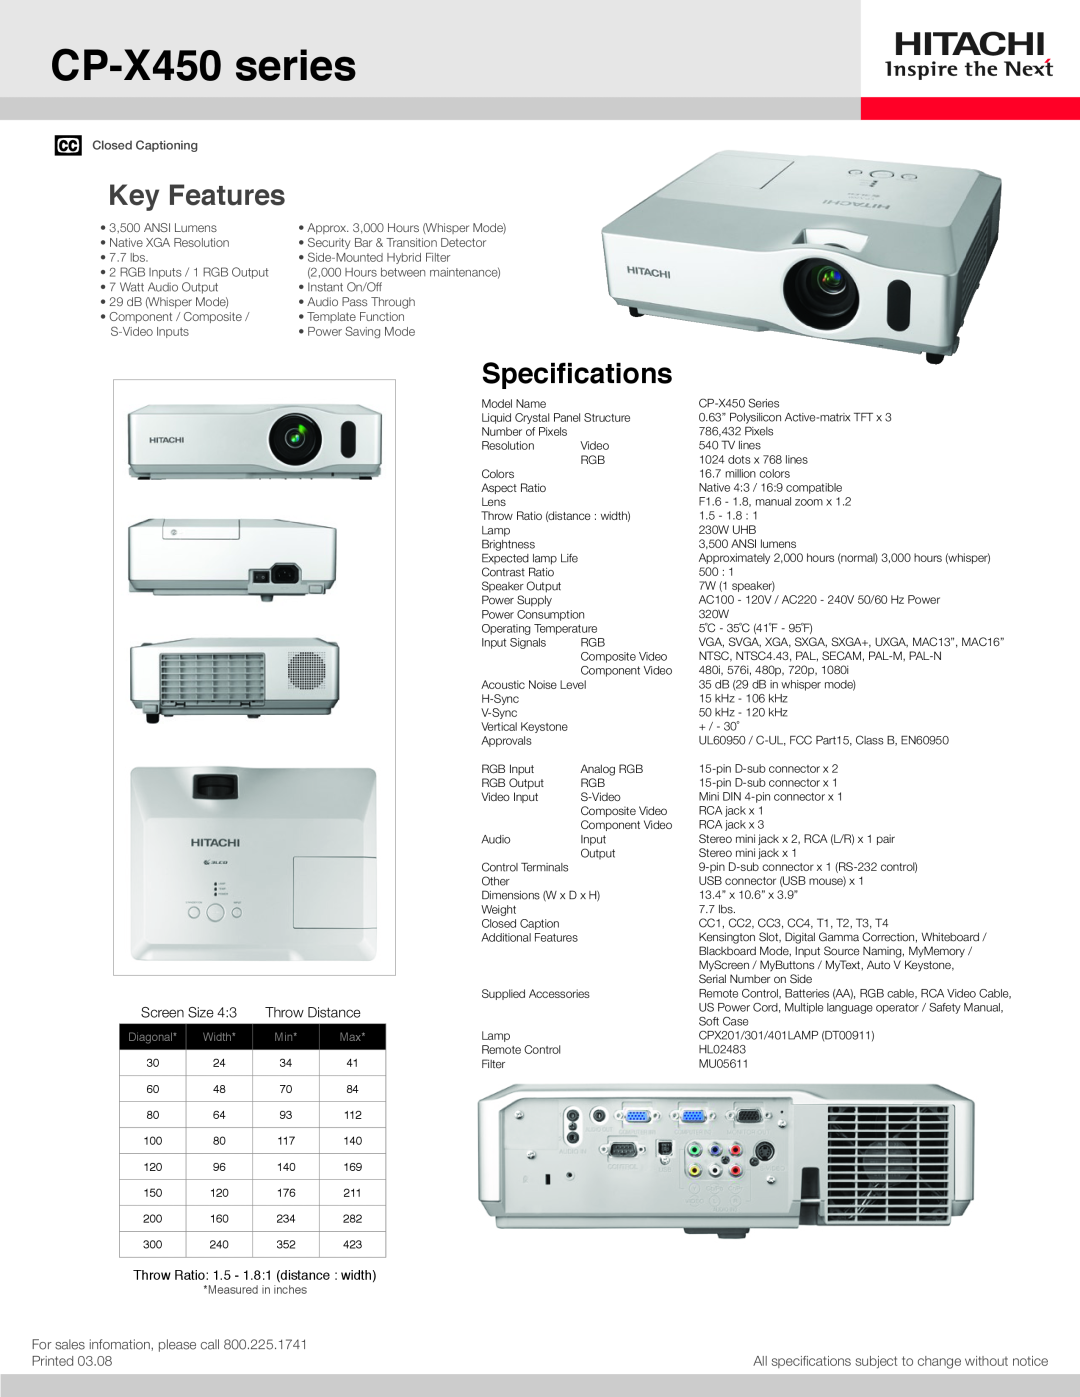 Hitachi specifications CP-X450series, Key Features, Specifications, Screen Size 4, Throw Distance, Printed, Diagonal 